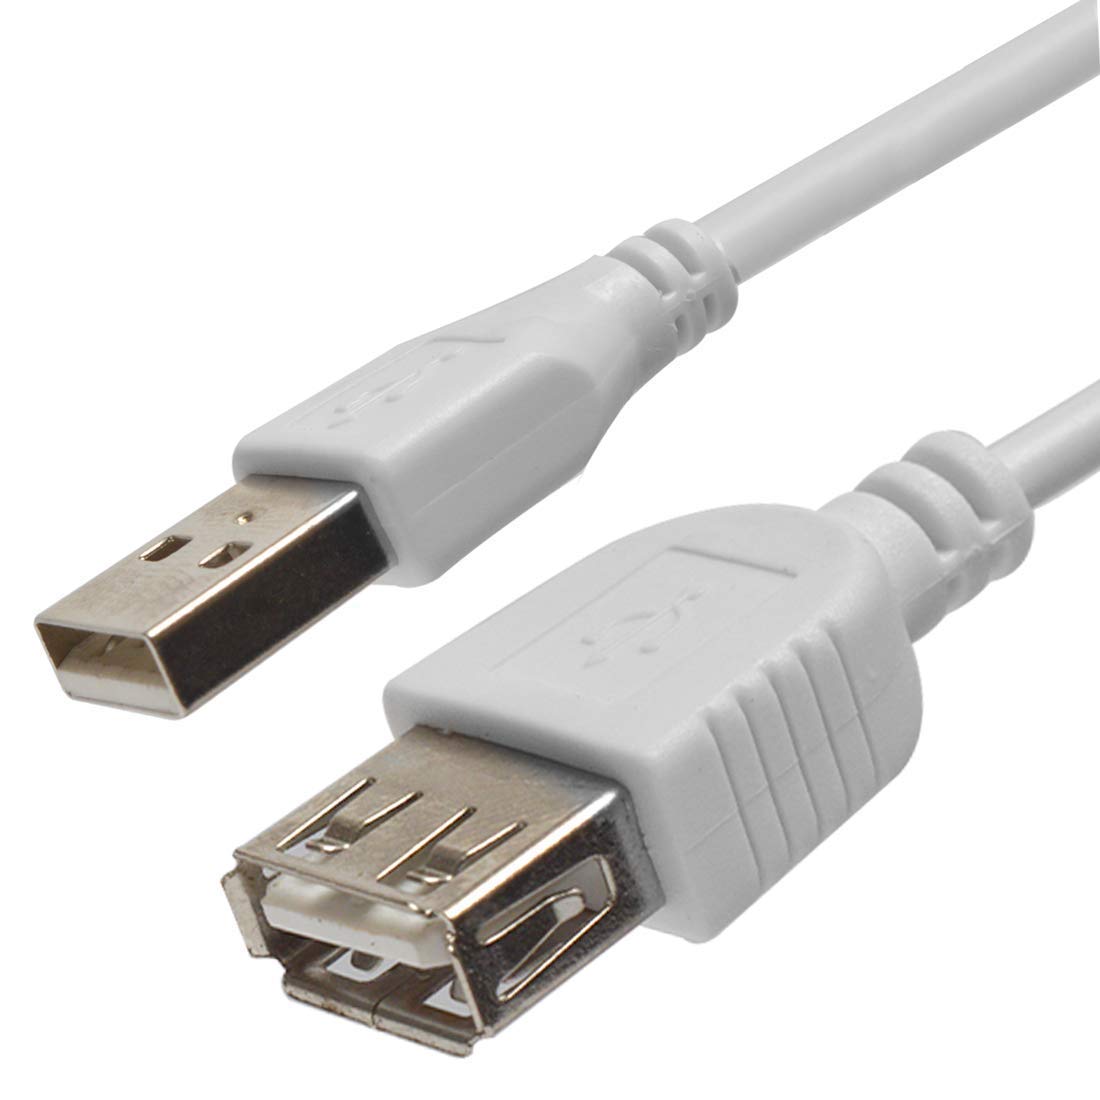 Extension Hi-Speed USB Cable Male A to Female A for Laptop/ PC/ Mac/ Printers (White)